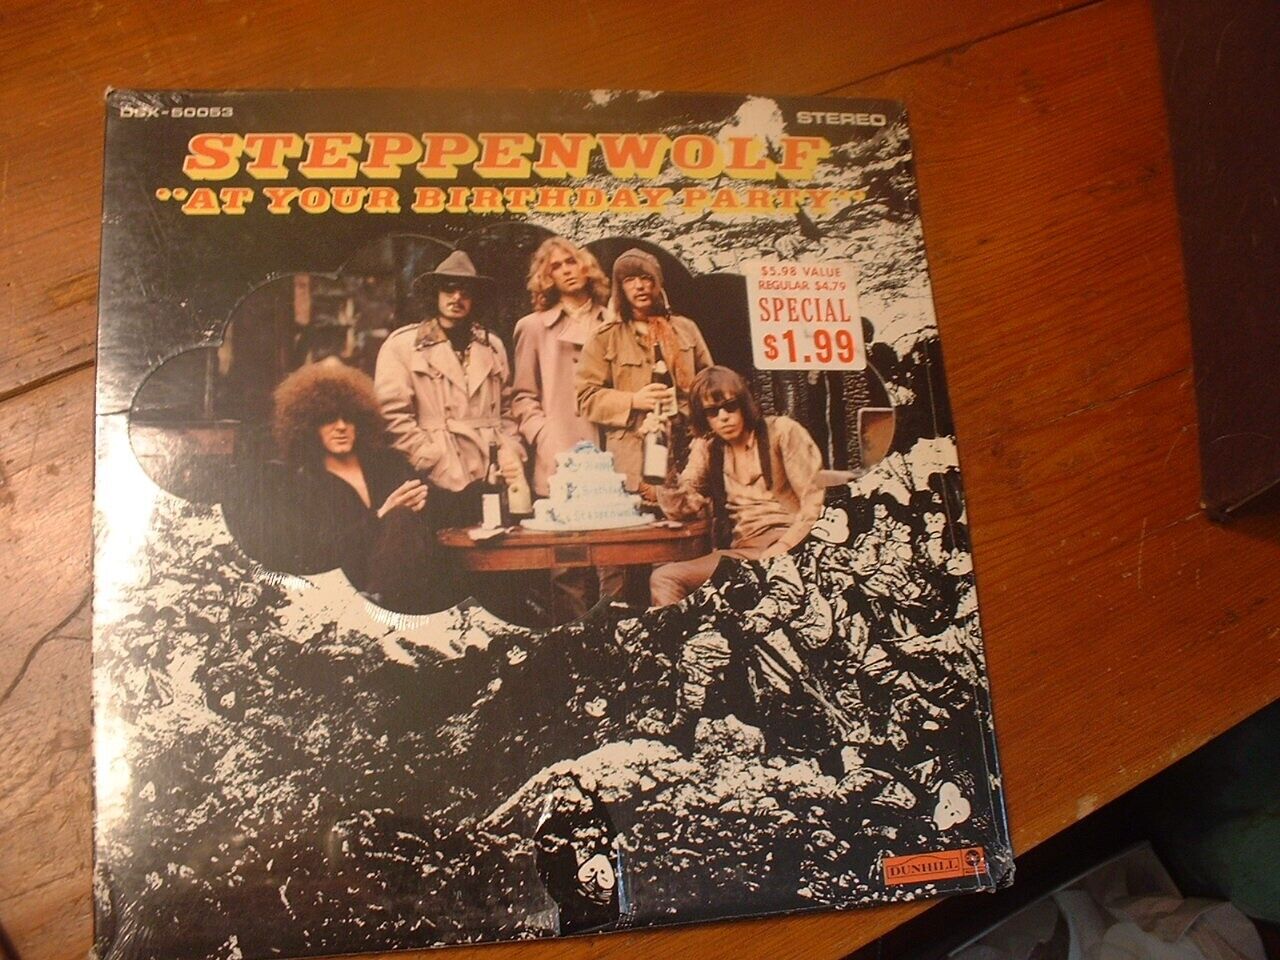 DSX 50053 First Pressing Factory Sealed Die Cut Steppenwolf - At Your Birthday